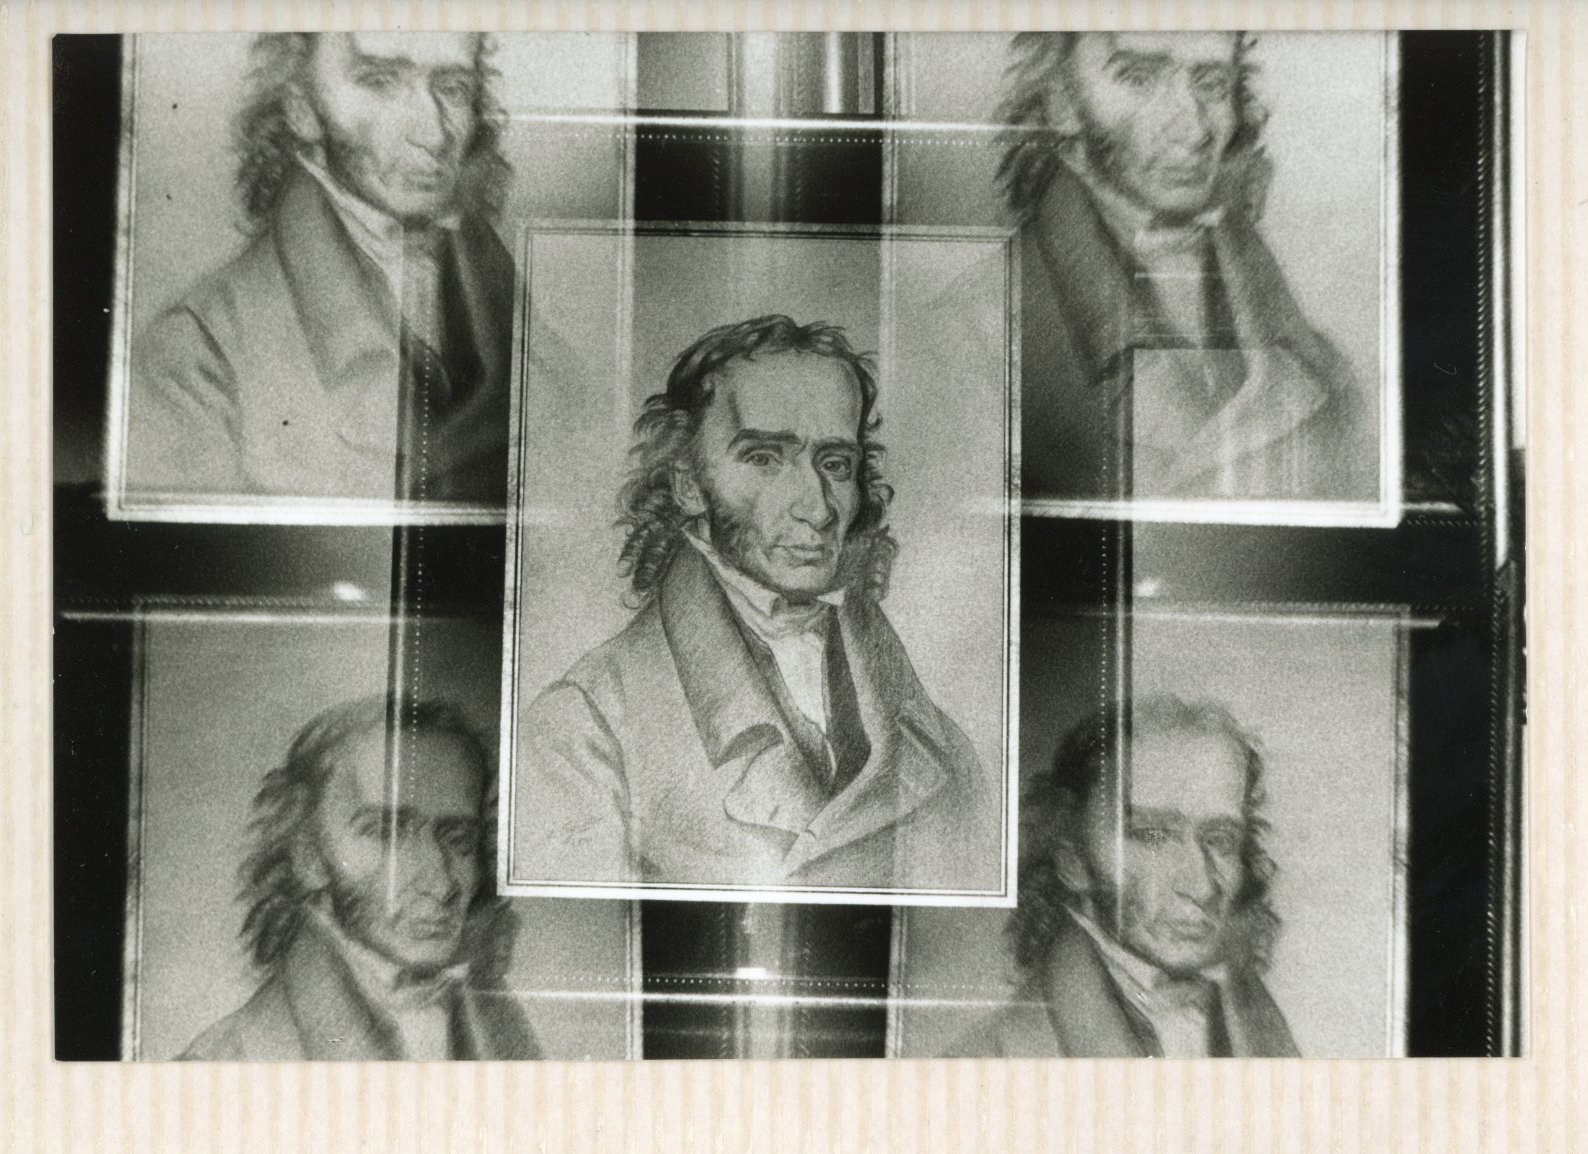  My father’s first  photographs as a teenager were of paintings of Niccolo Paganini in the Paganini wall. 1970’s.  